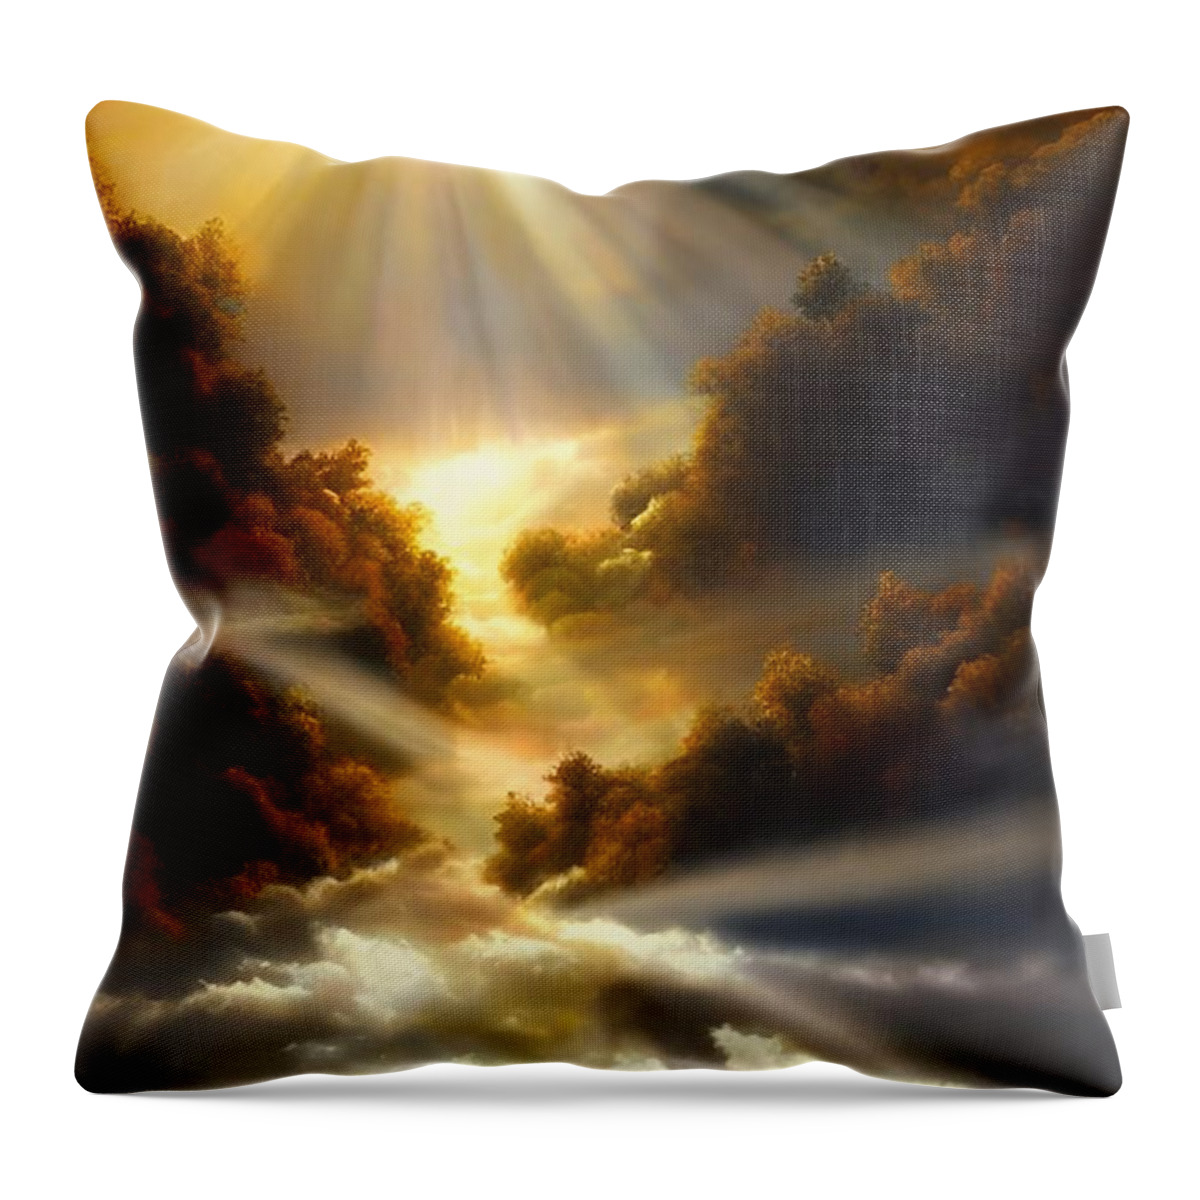 Inspiring Throw Pillow featuring the mixed media Heavenly Light by Bonnie Bruno